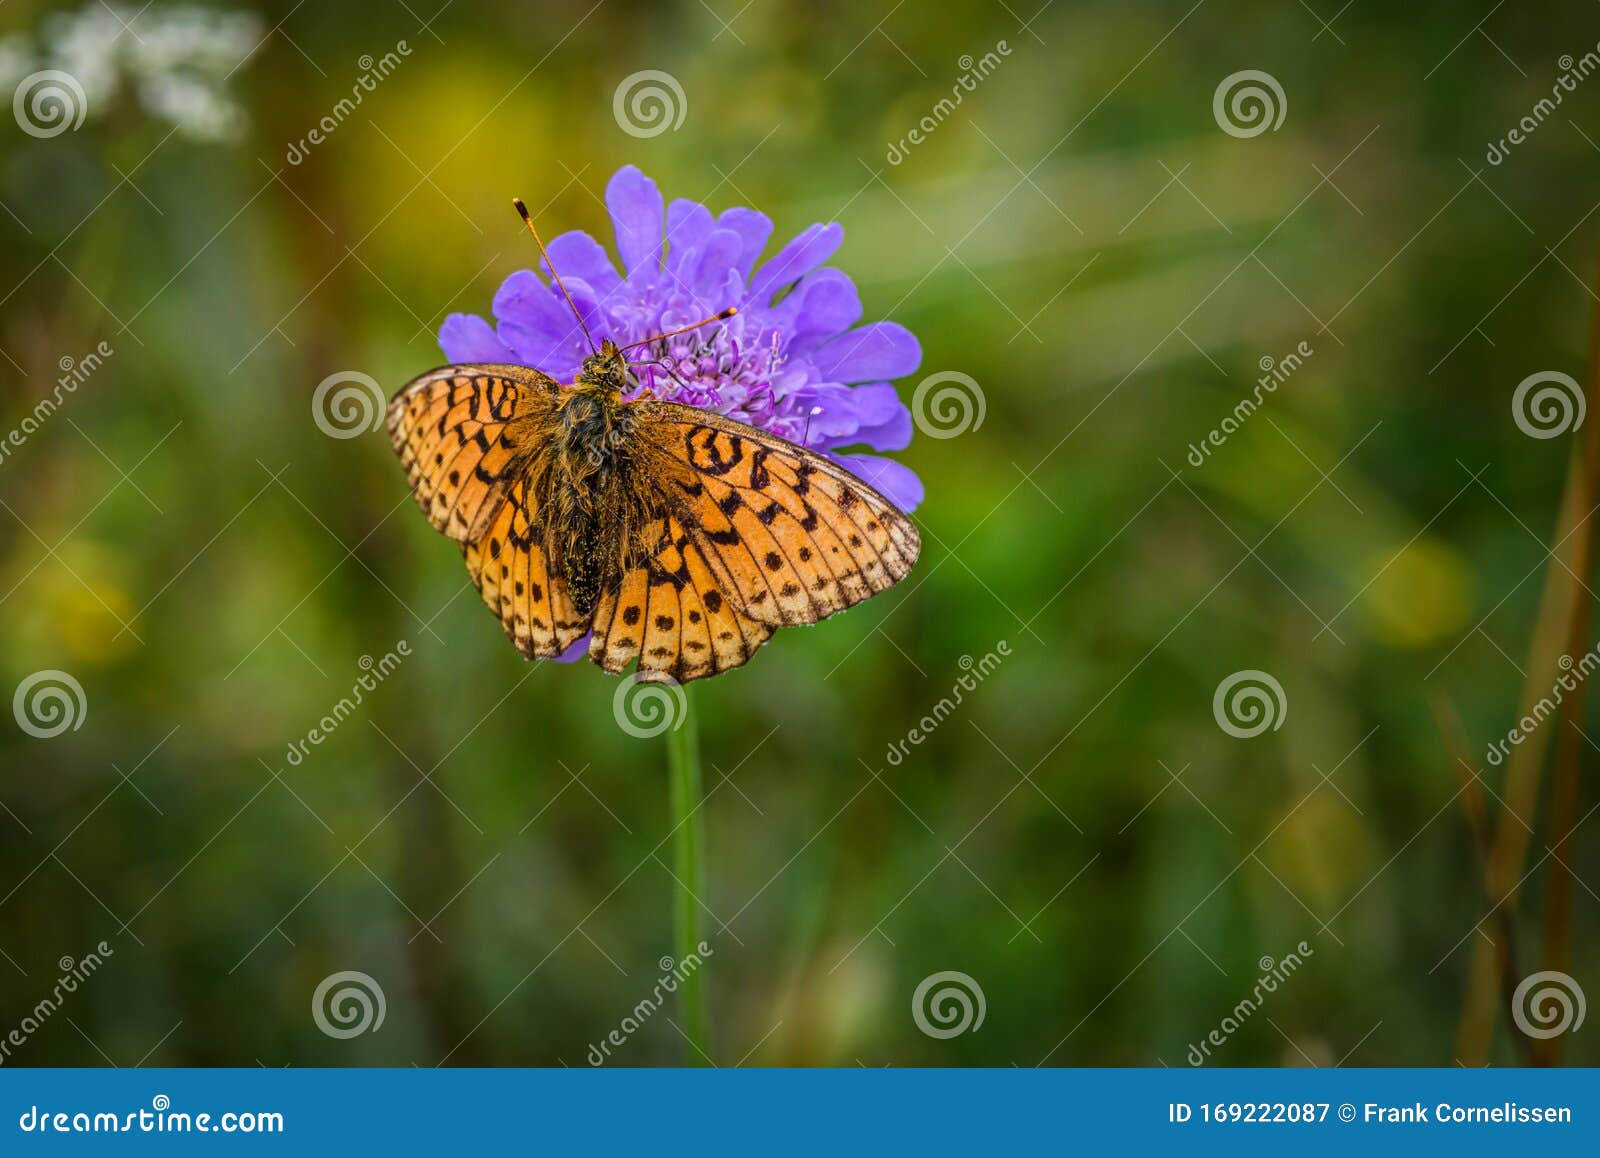 lesser marbled fritillar butterfly or brenthis ino on a purple flower